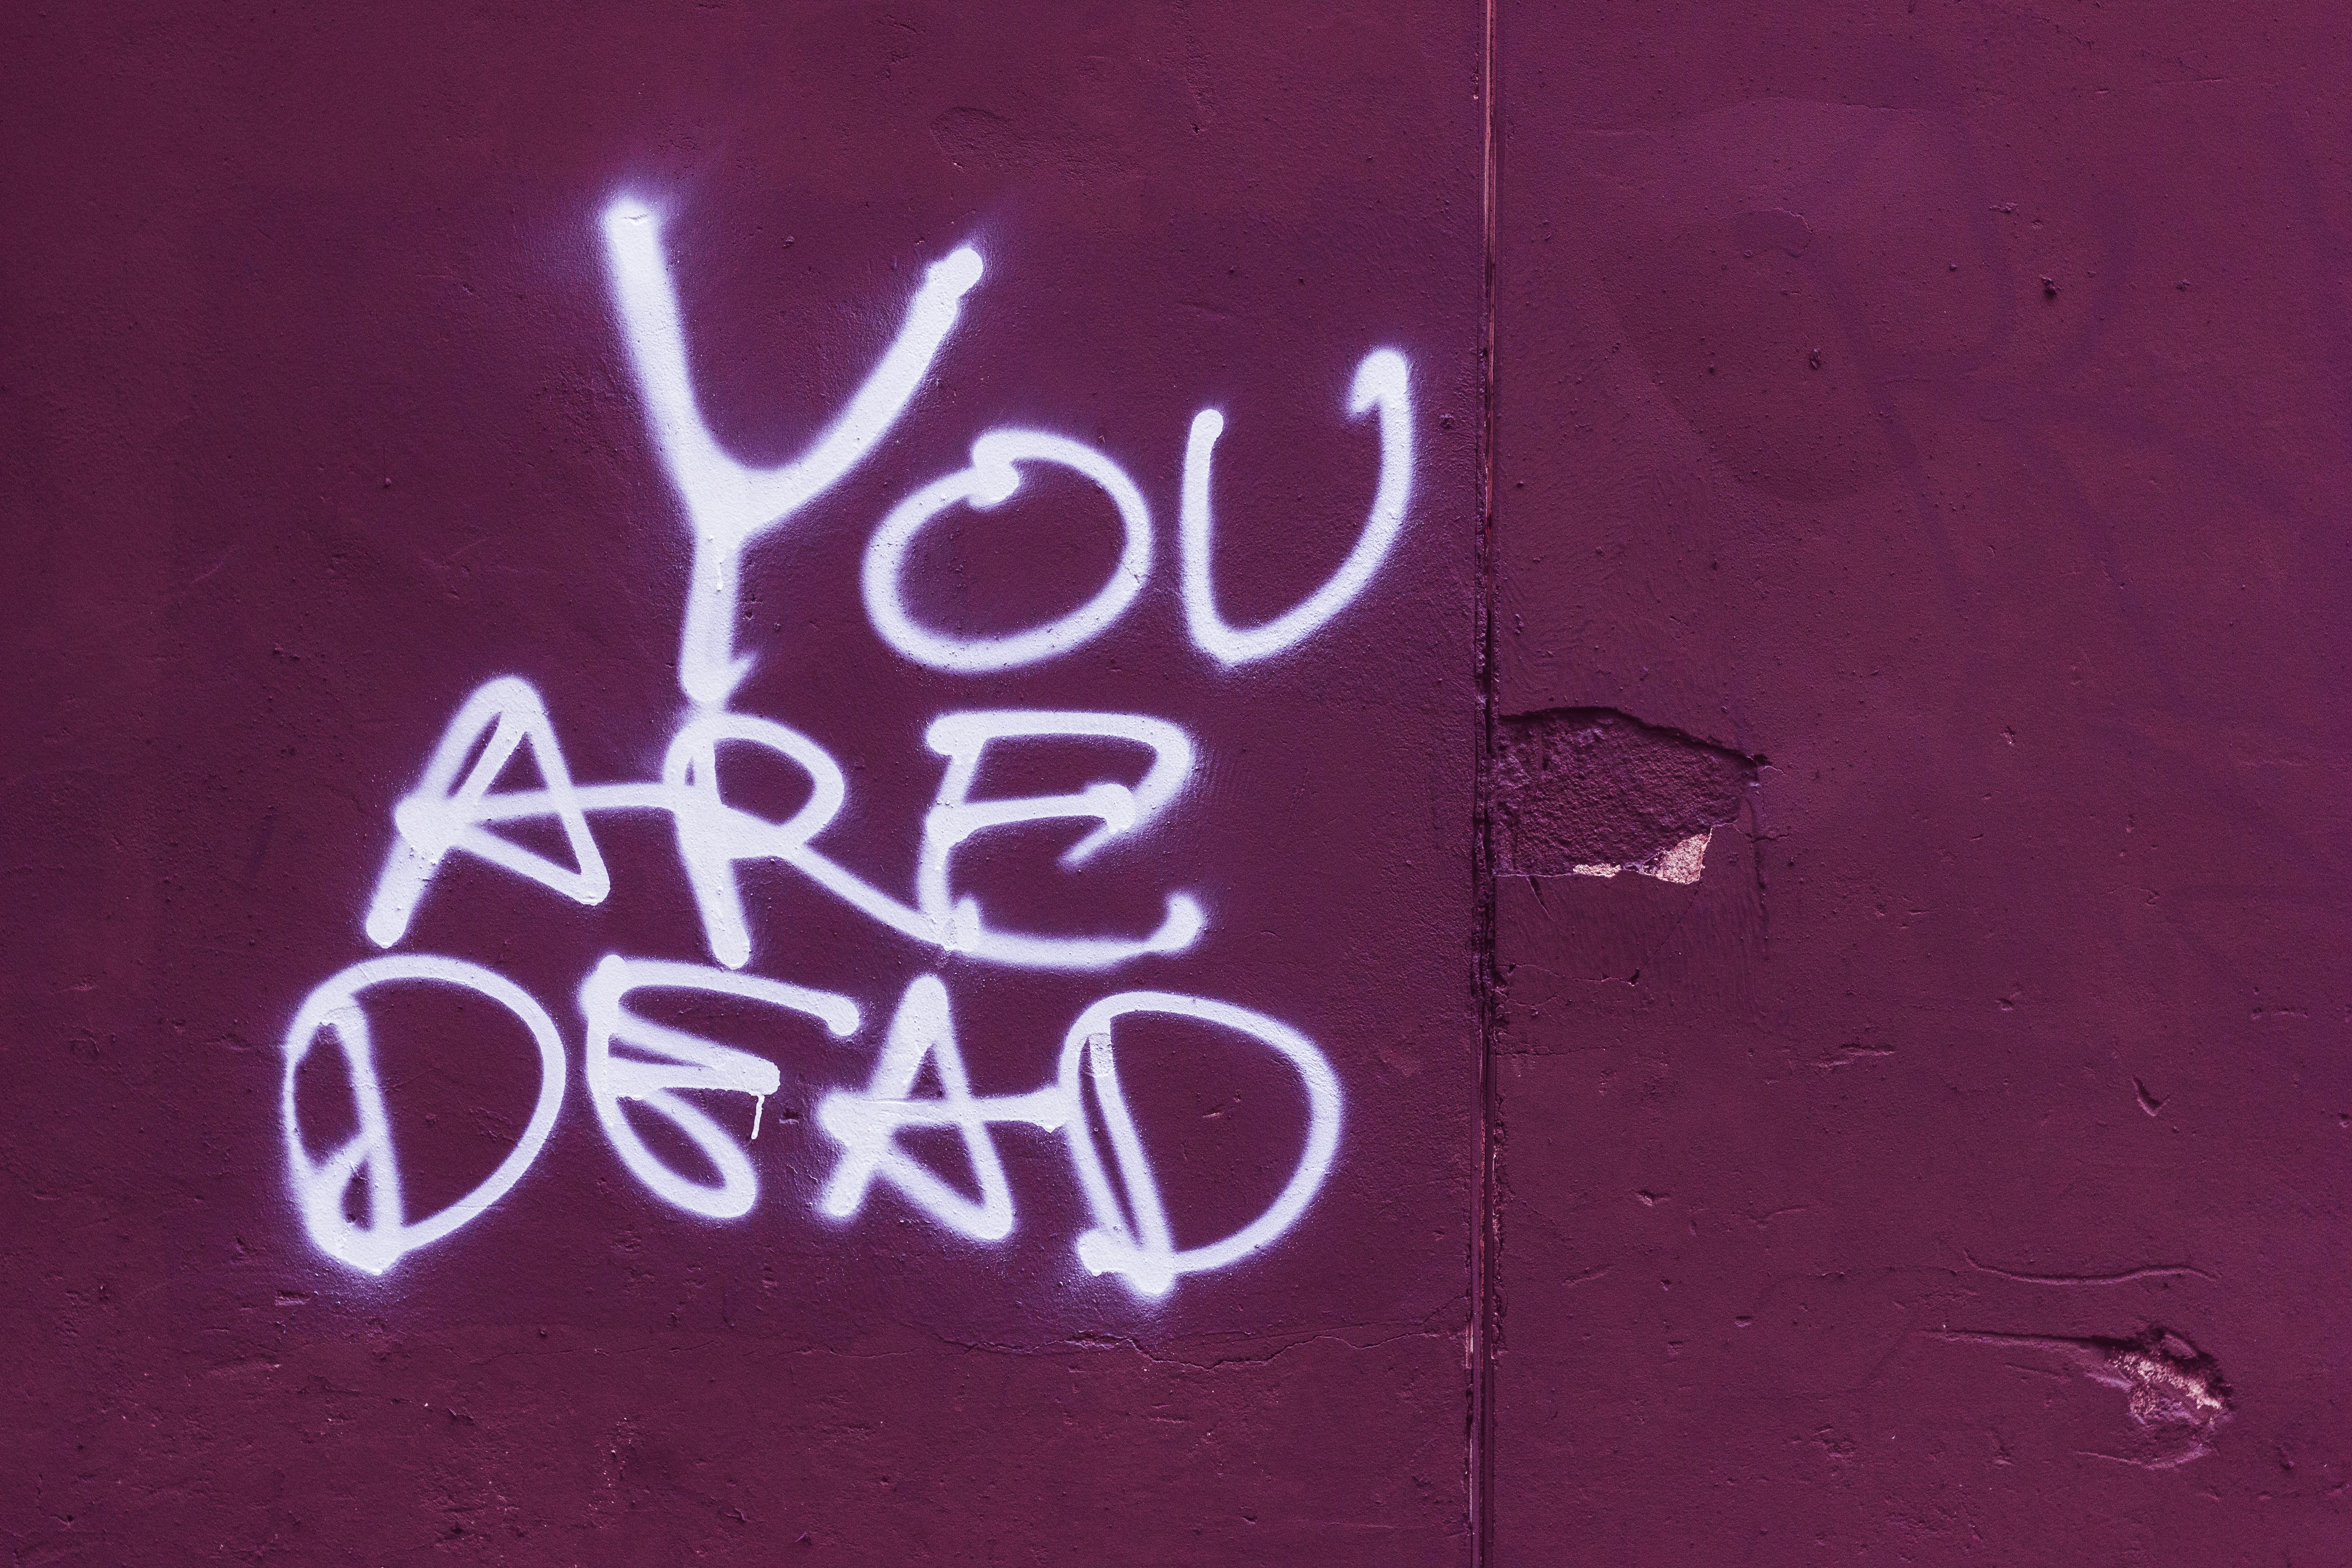 Hand written words spray painted on a plum coloured wall saying "You Are Dead".